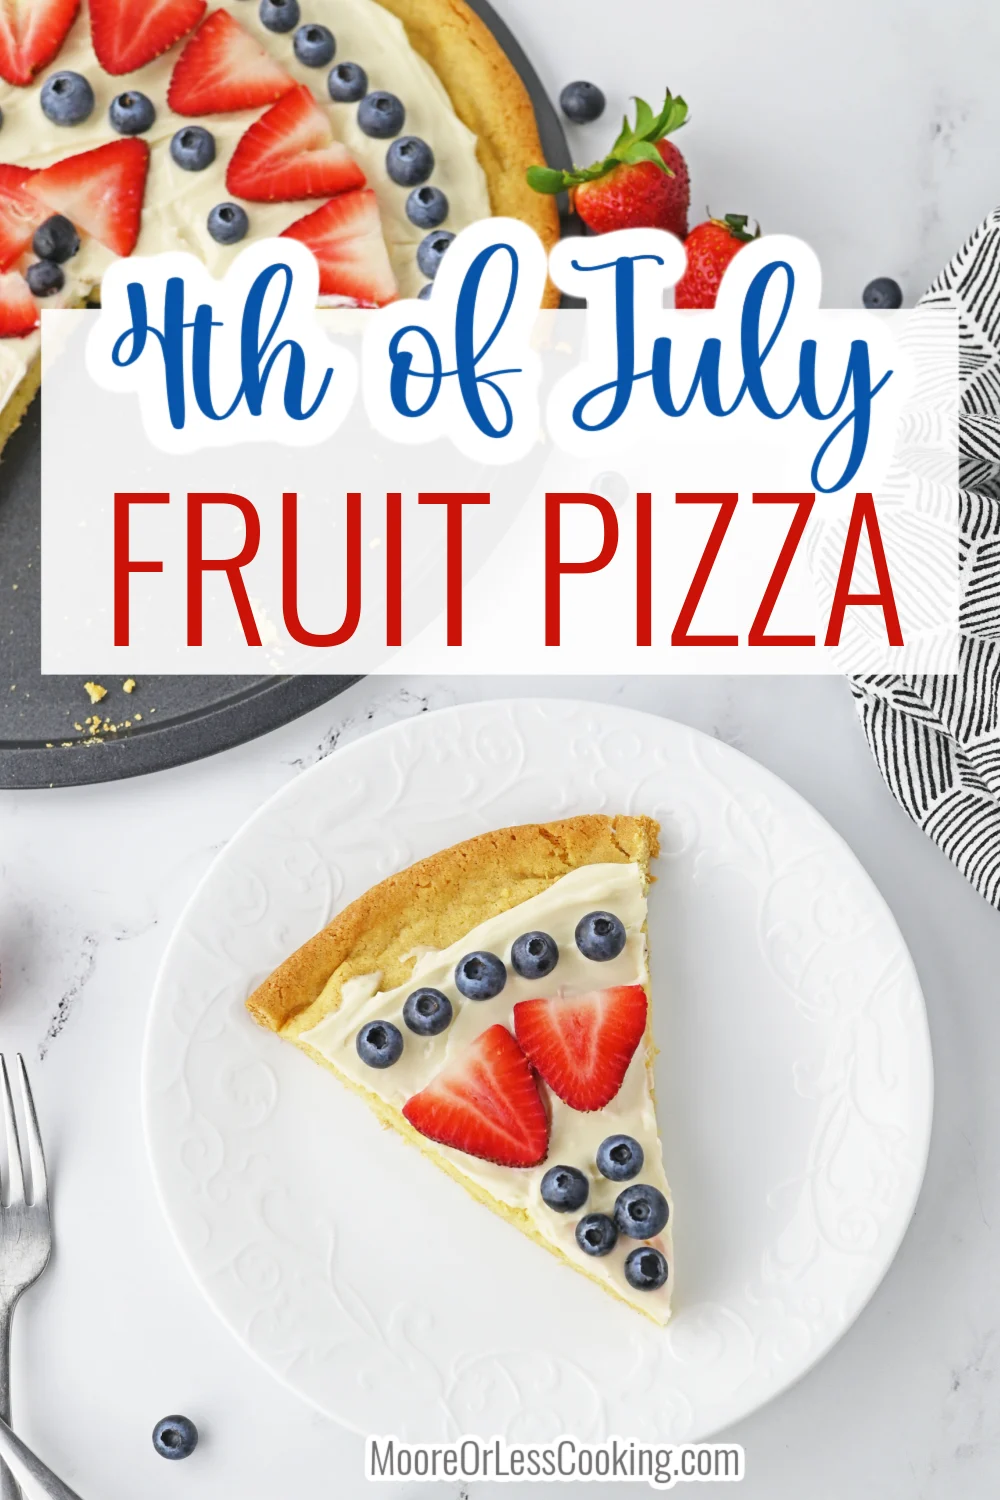 With its sugar cookie crust, sweet cream cheese frosting and red and blue fruity toppings, this 4th of July Fruit Pizza is an easy dessert to help make your patriotic celebration festive and delicious. via @Mooreorlesscook